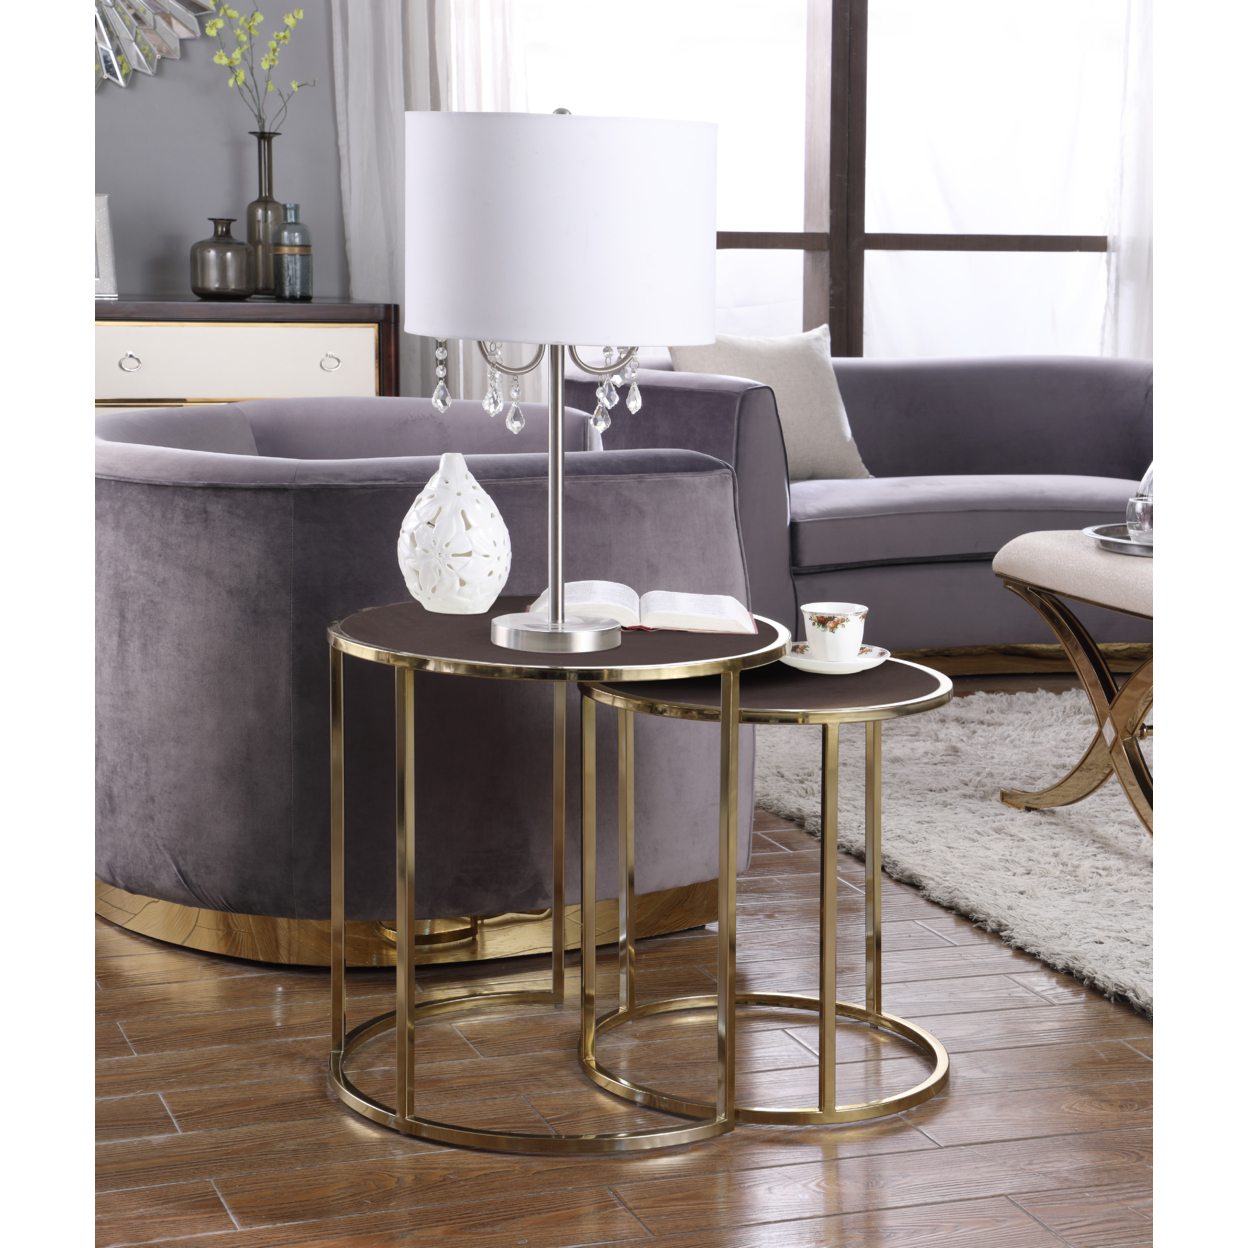 Blayne Nightstand Side Table 2 Piece Set Gold Finished Gibbous Moon Frame PU Leather Top - Brown